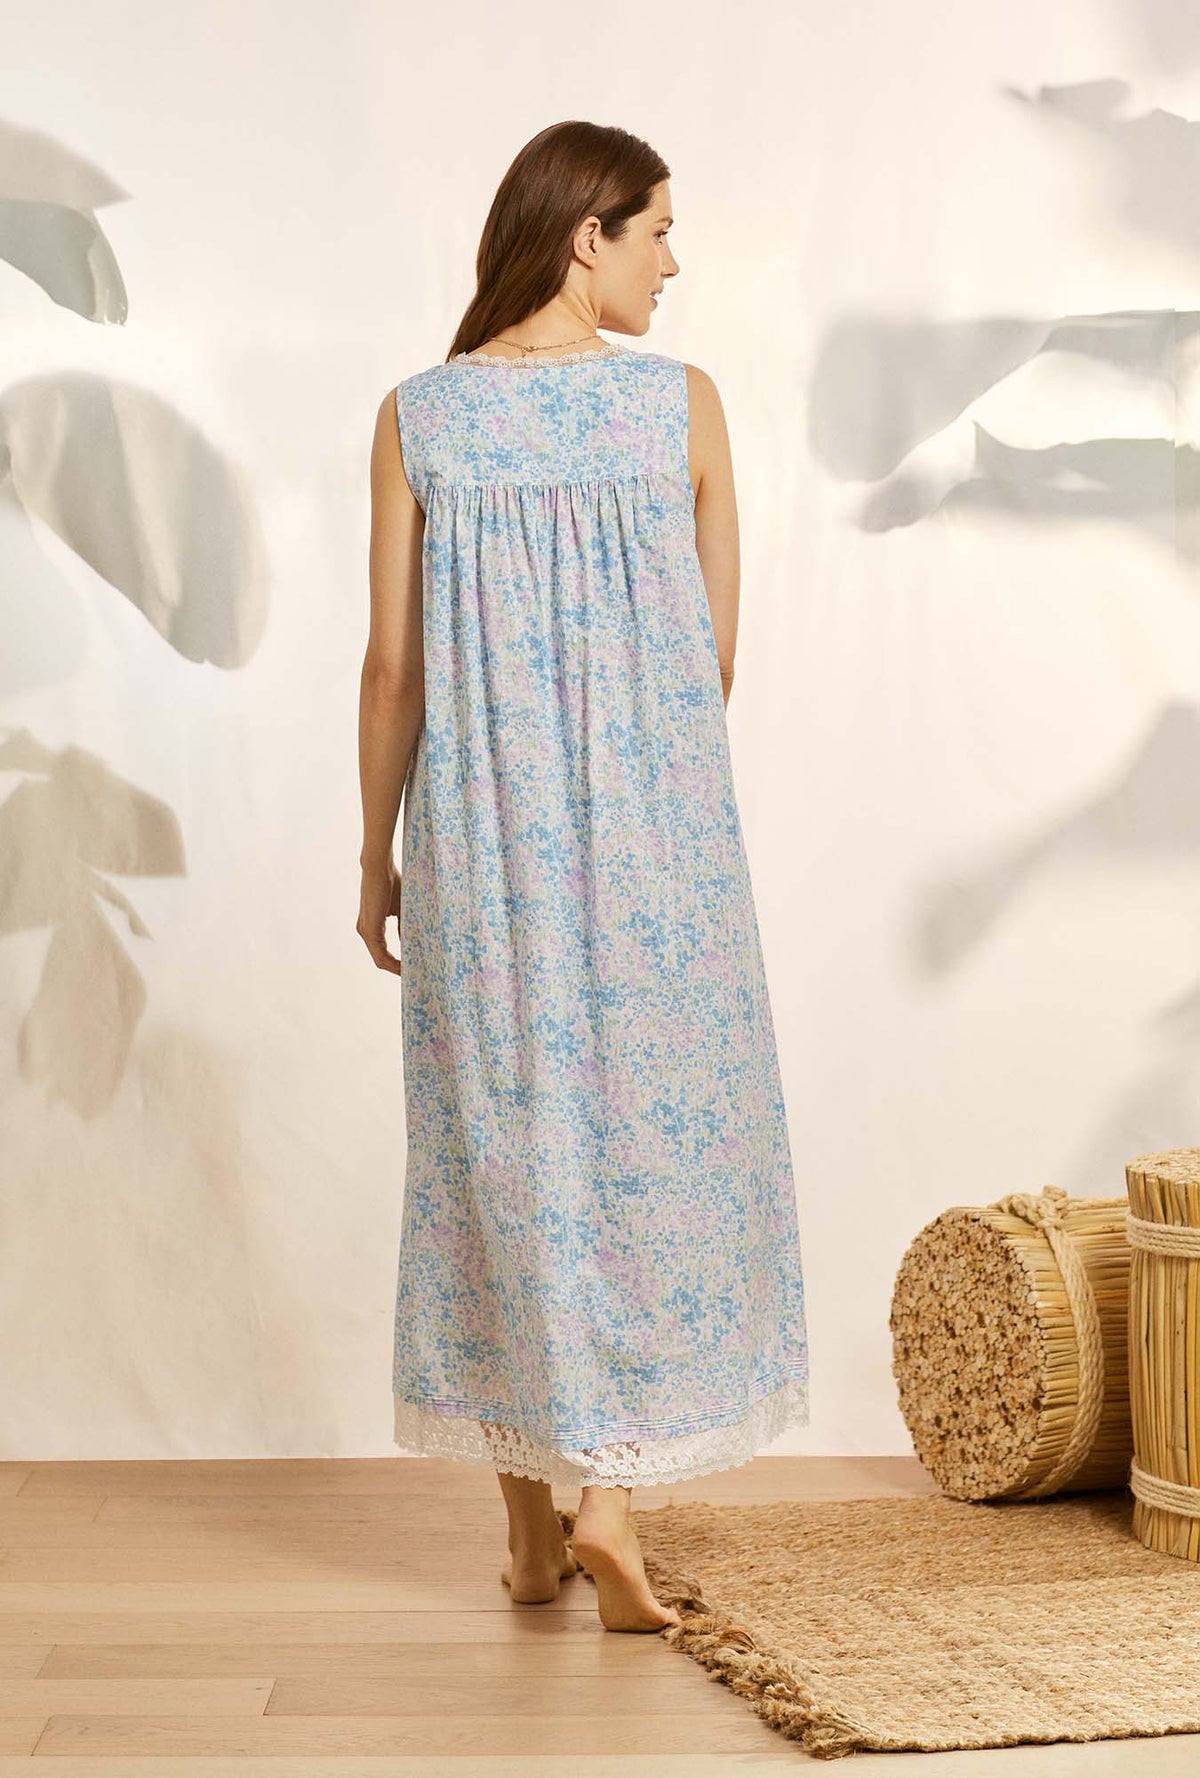 A lady wearing blue sleeveless eileen cotton nightgown with montara fields print.